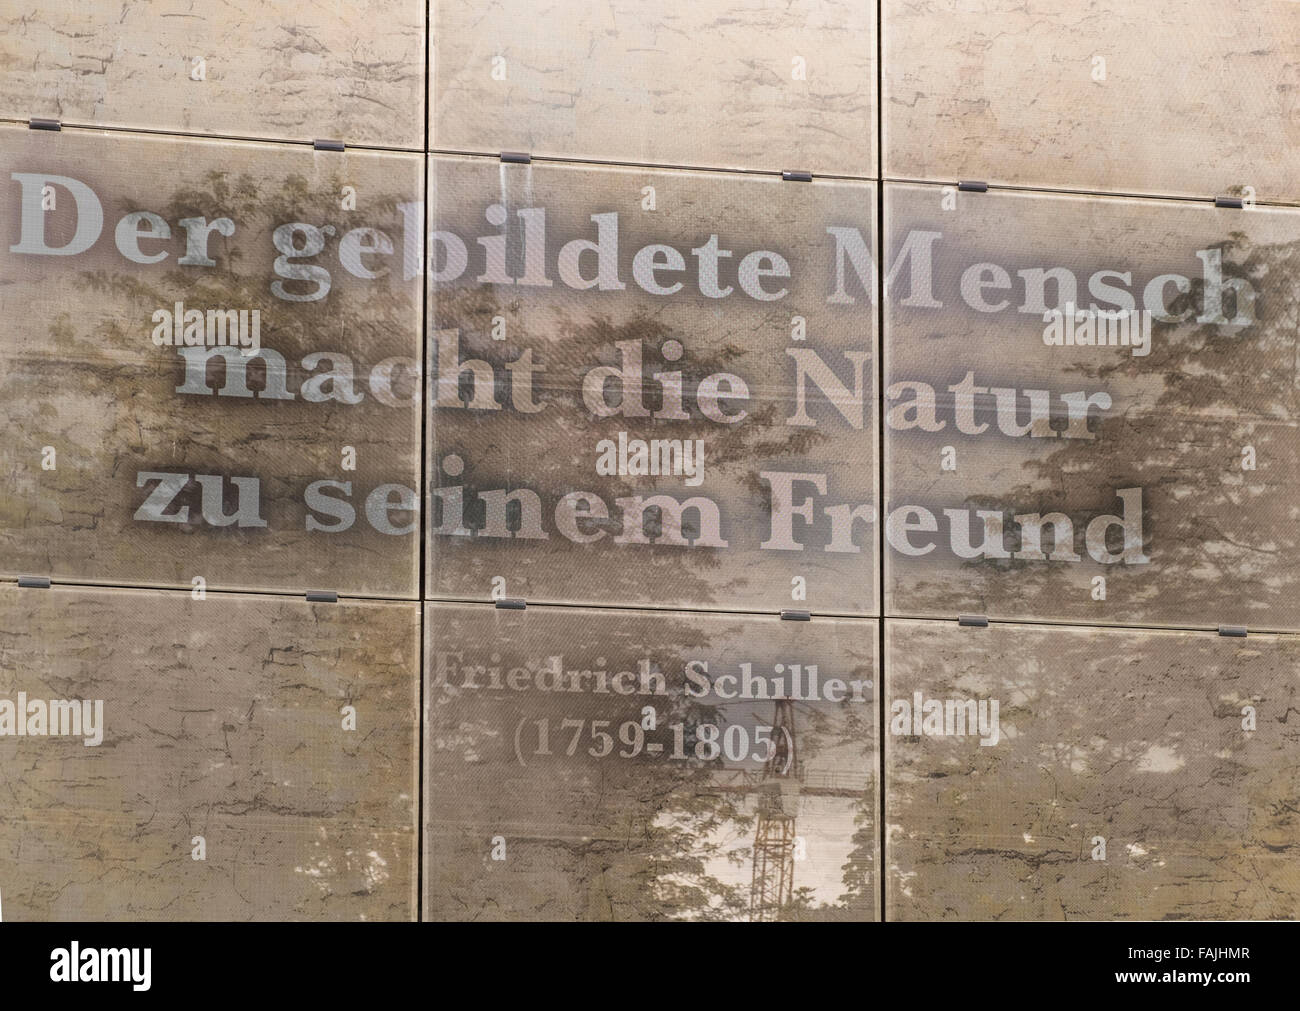 square of glass plates at the city wall displays a quote by geman poet friedrich schiller: the educated man makes nature his fri Stock Photo